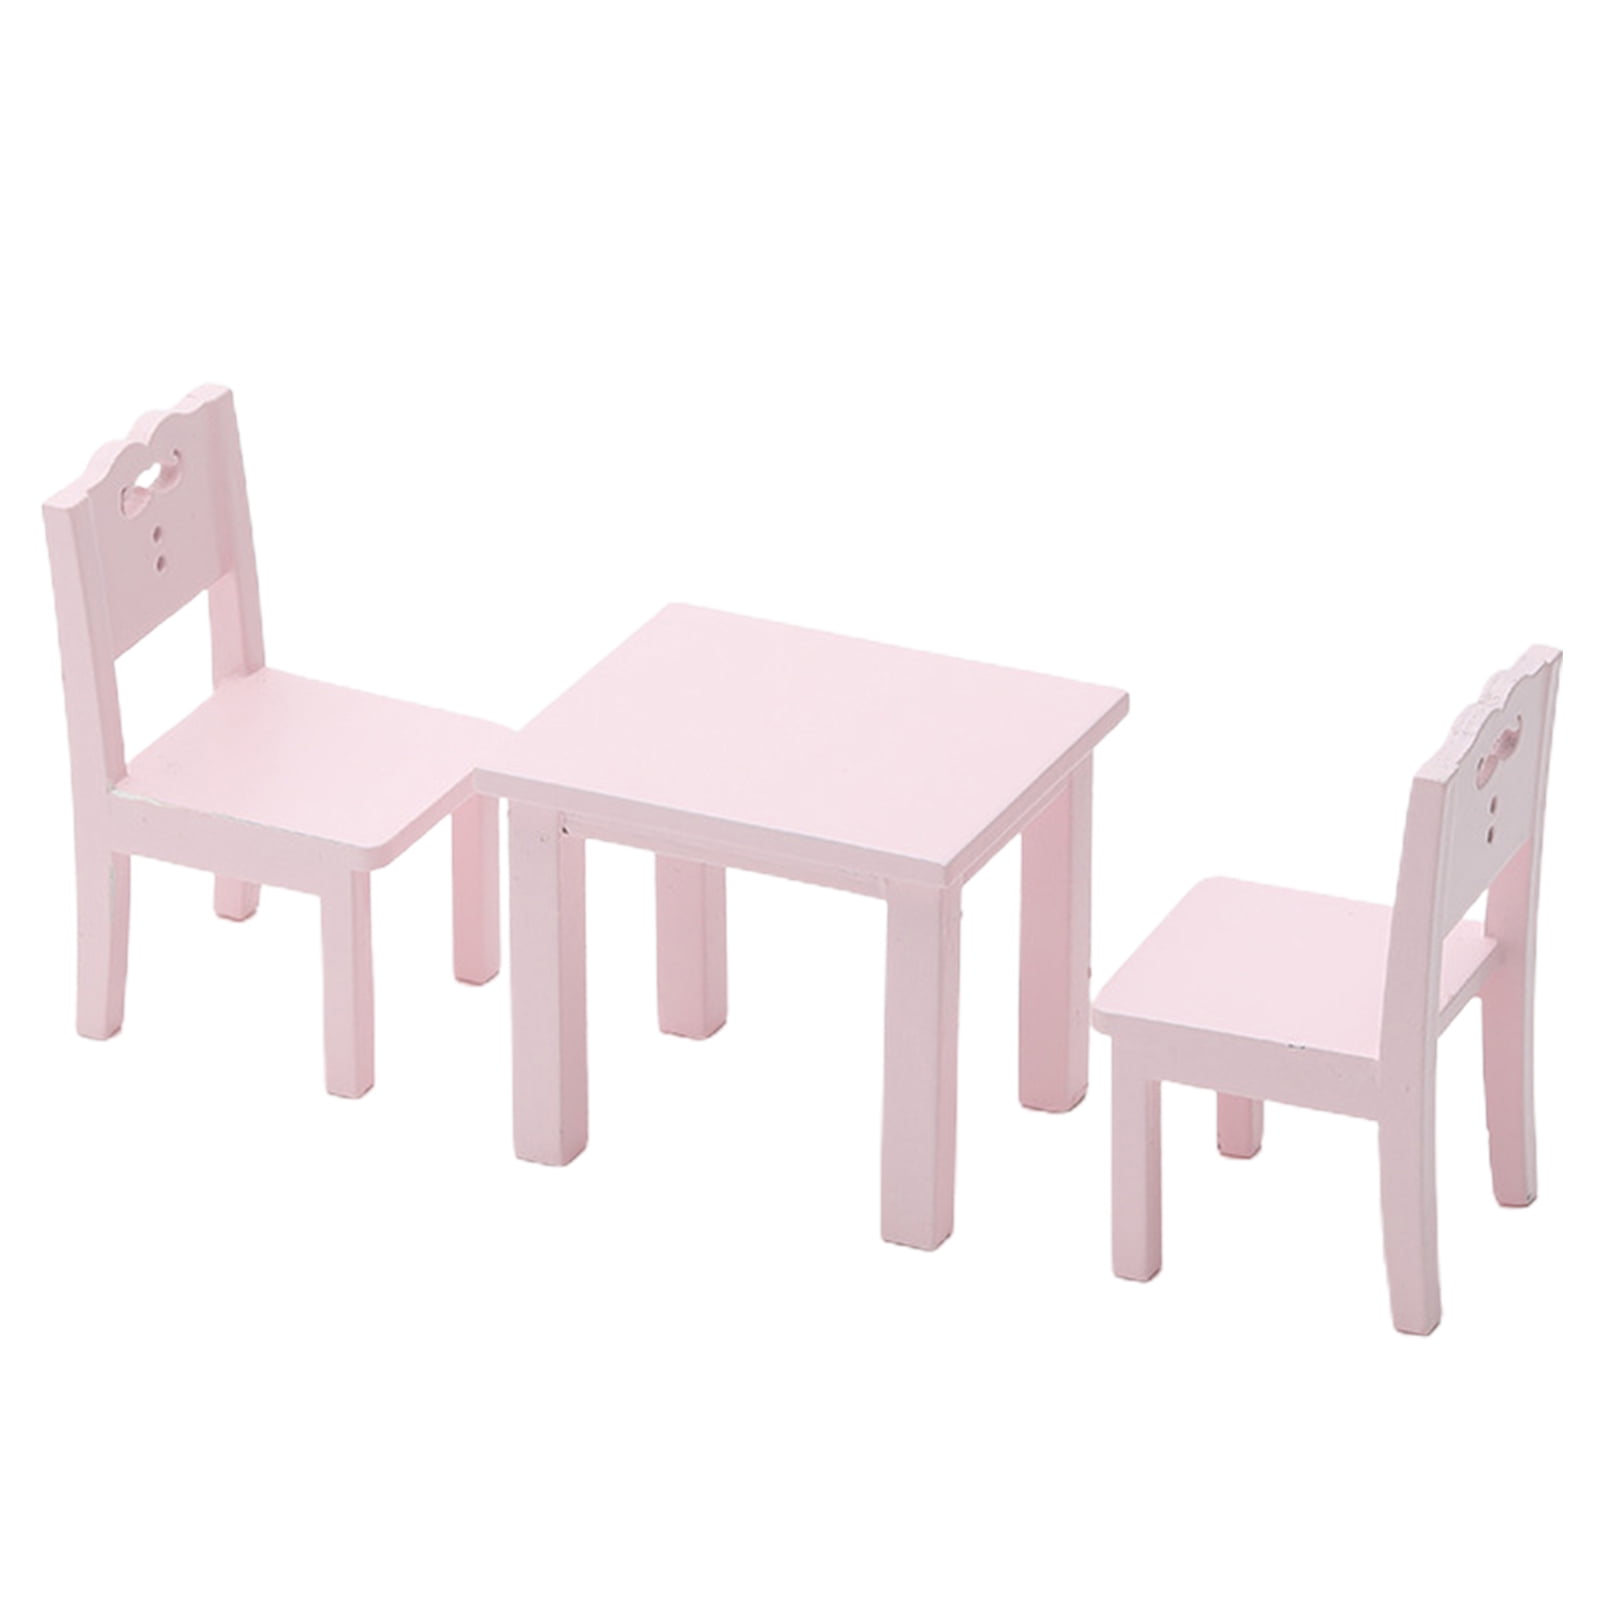 Temacd Kids Table Chair Set Mini Furniture Model Decoration Gift for 1/ ...